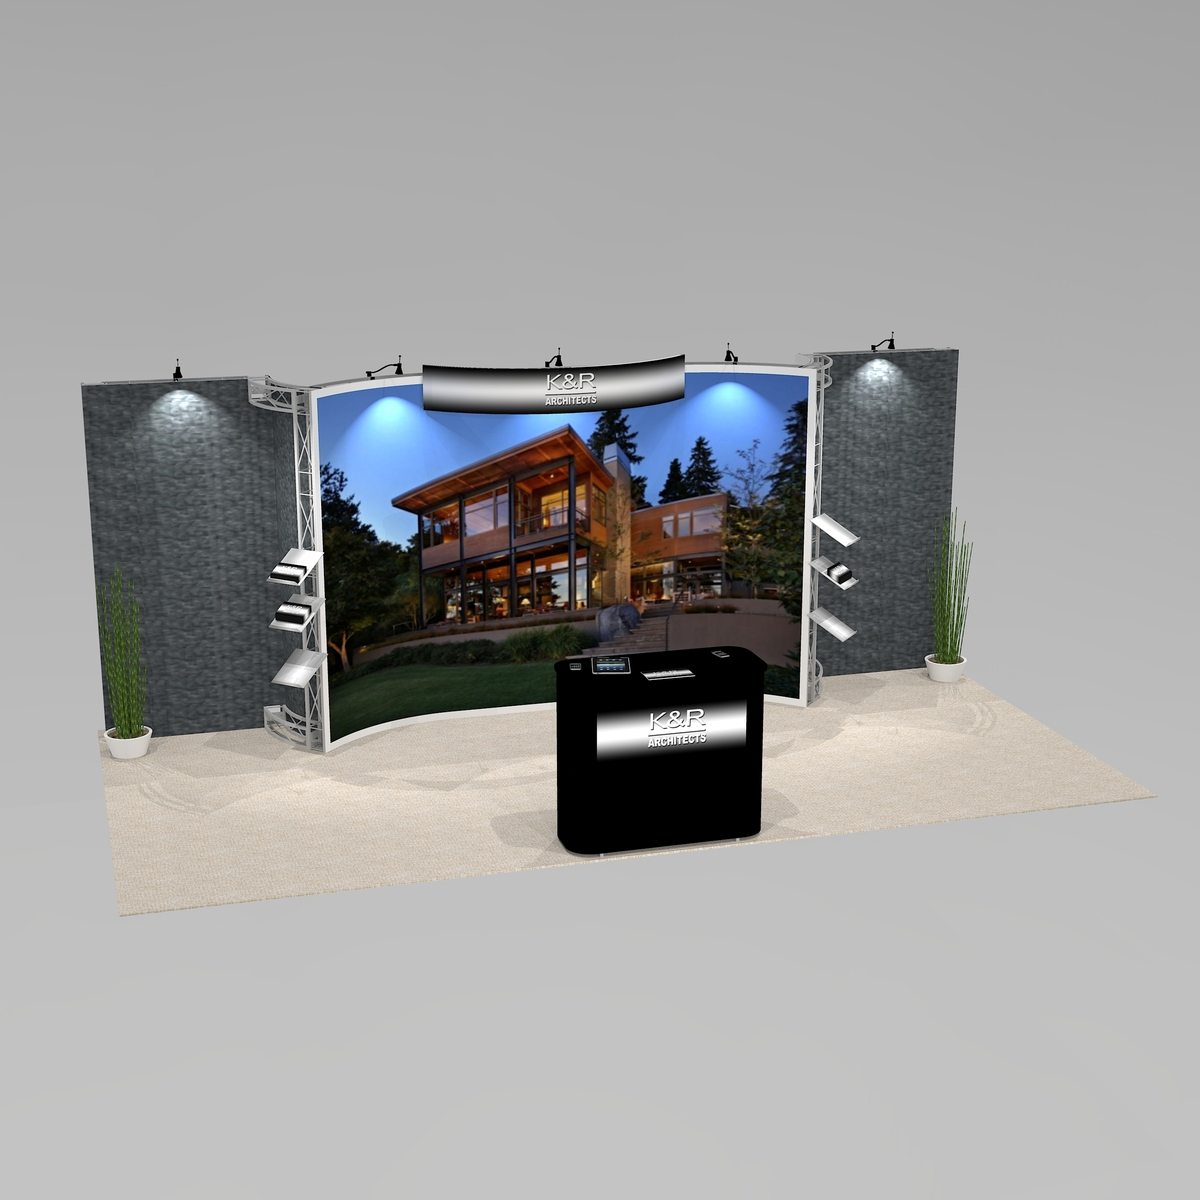 Panoramic mural trade show exhibit design POT1020 Graphic Package A